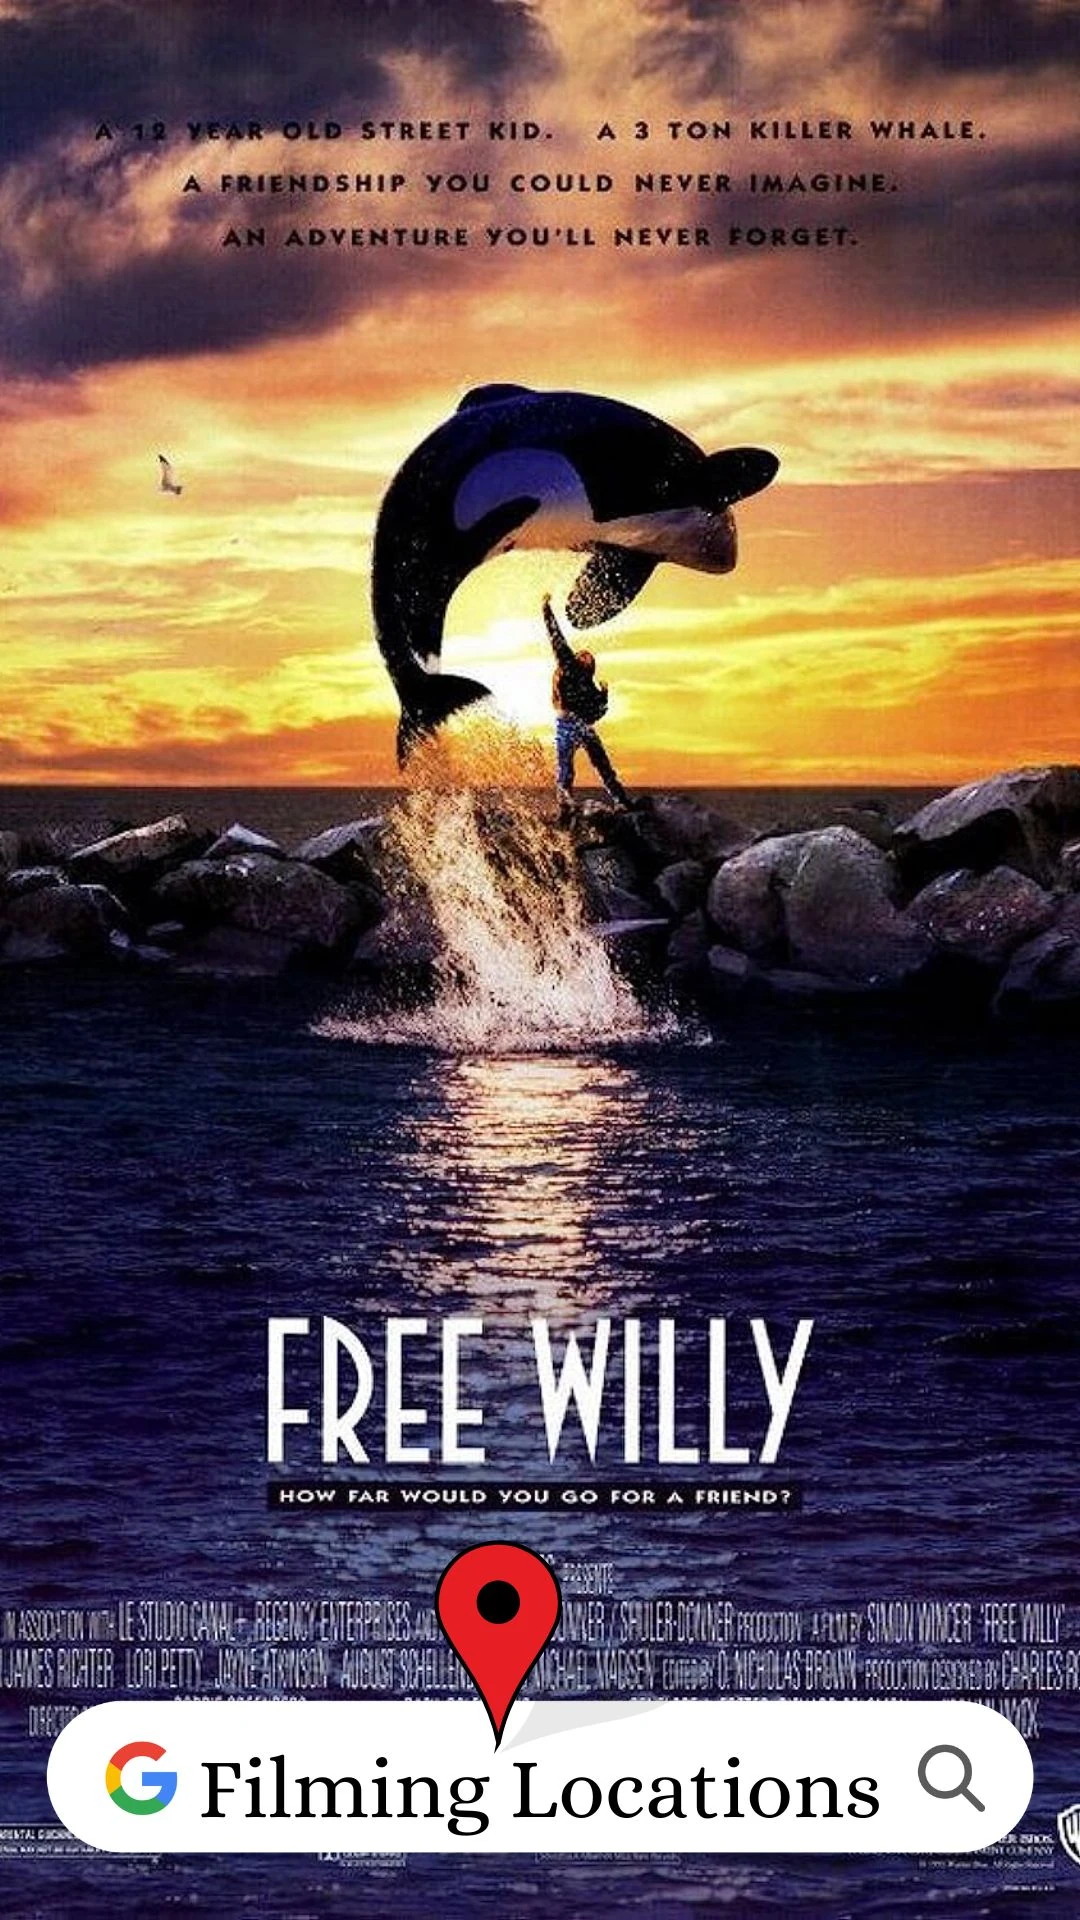 Free Willy Filming Locations 